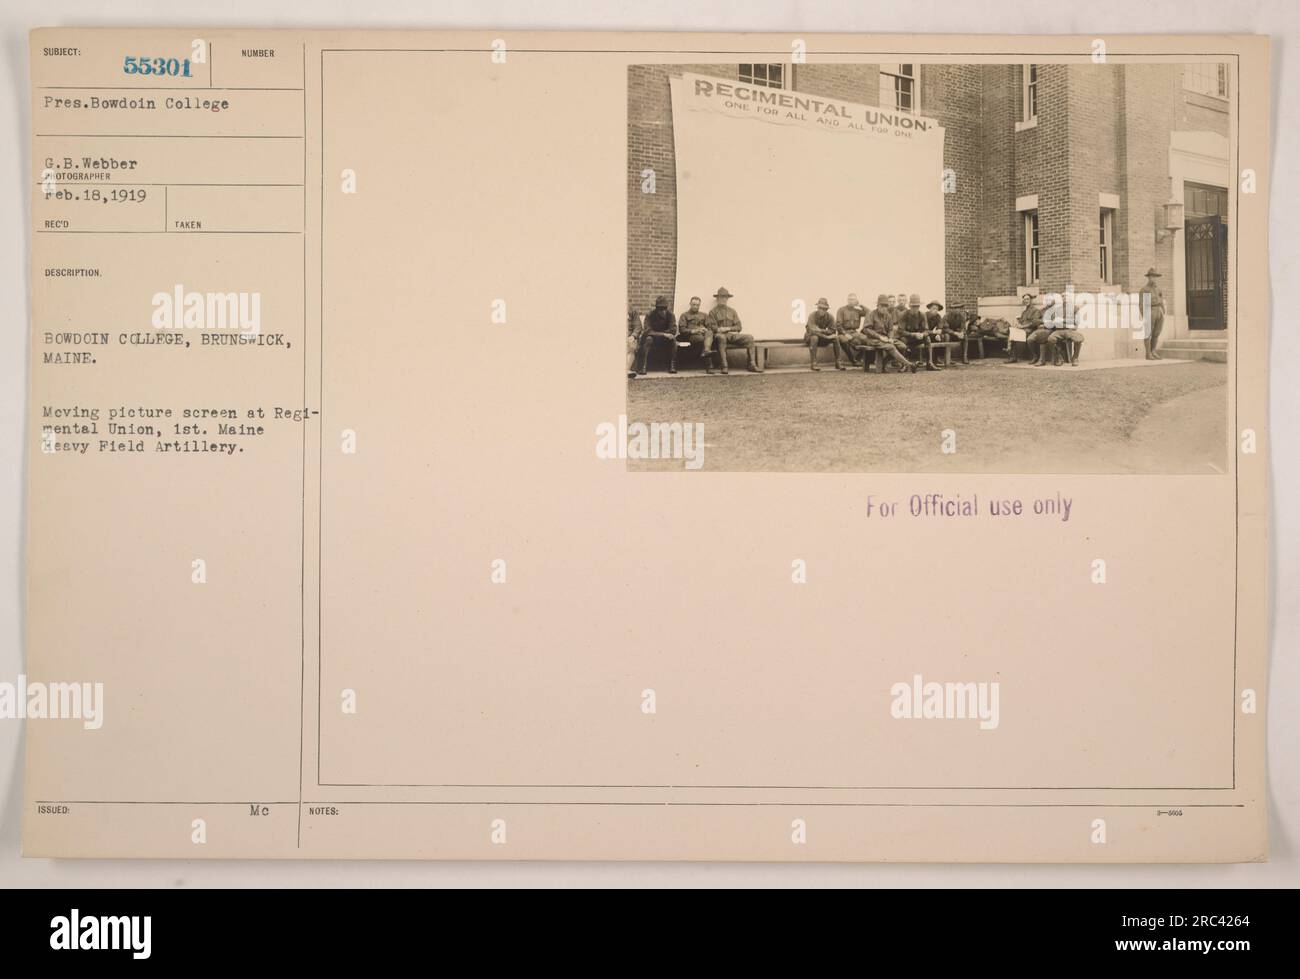 'BOWDOIN COLLEGE, BRUNSWICK, MAINE. This photograph shows a moving picture screen at the Regimental Union of the 1st Maine Heavy Field Artillery. The image, taken on February 18, 1919, was published with reference number 55301. The screen was used for official purposes and was located at Bowdoin College in Brunswick, Maine.' Stock Photo